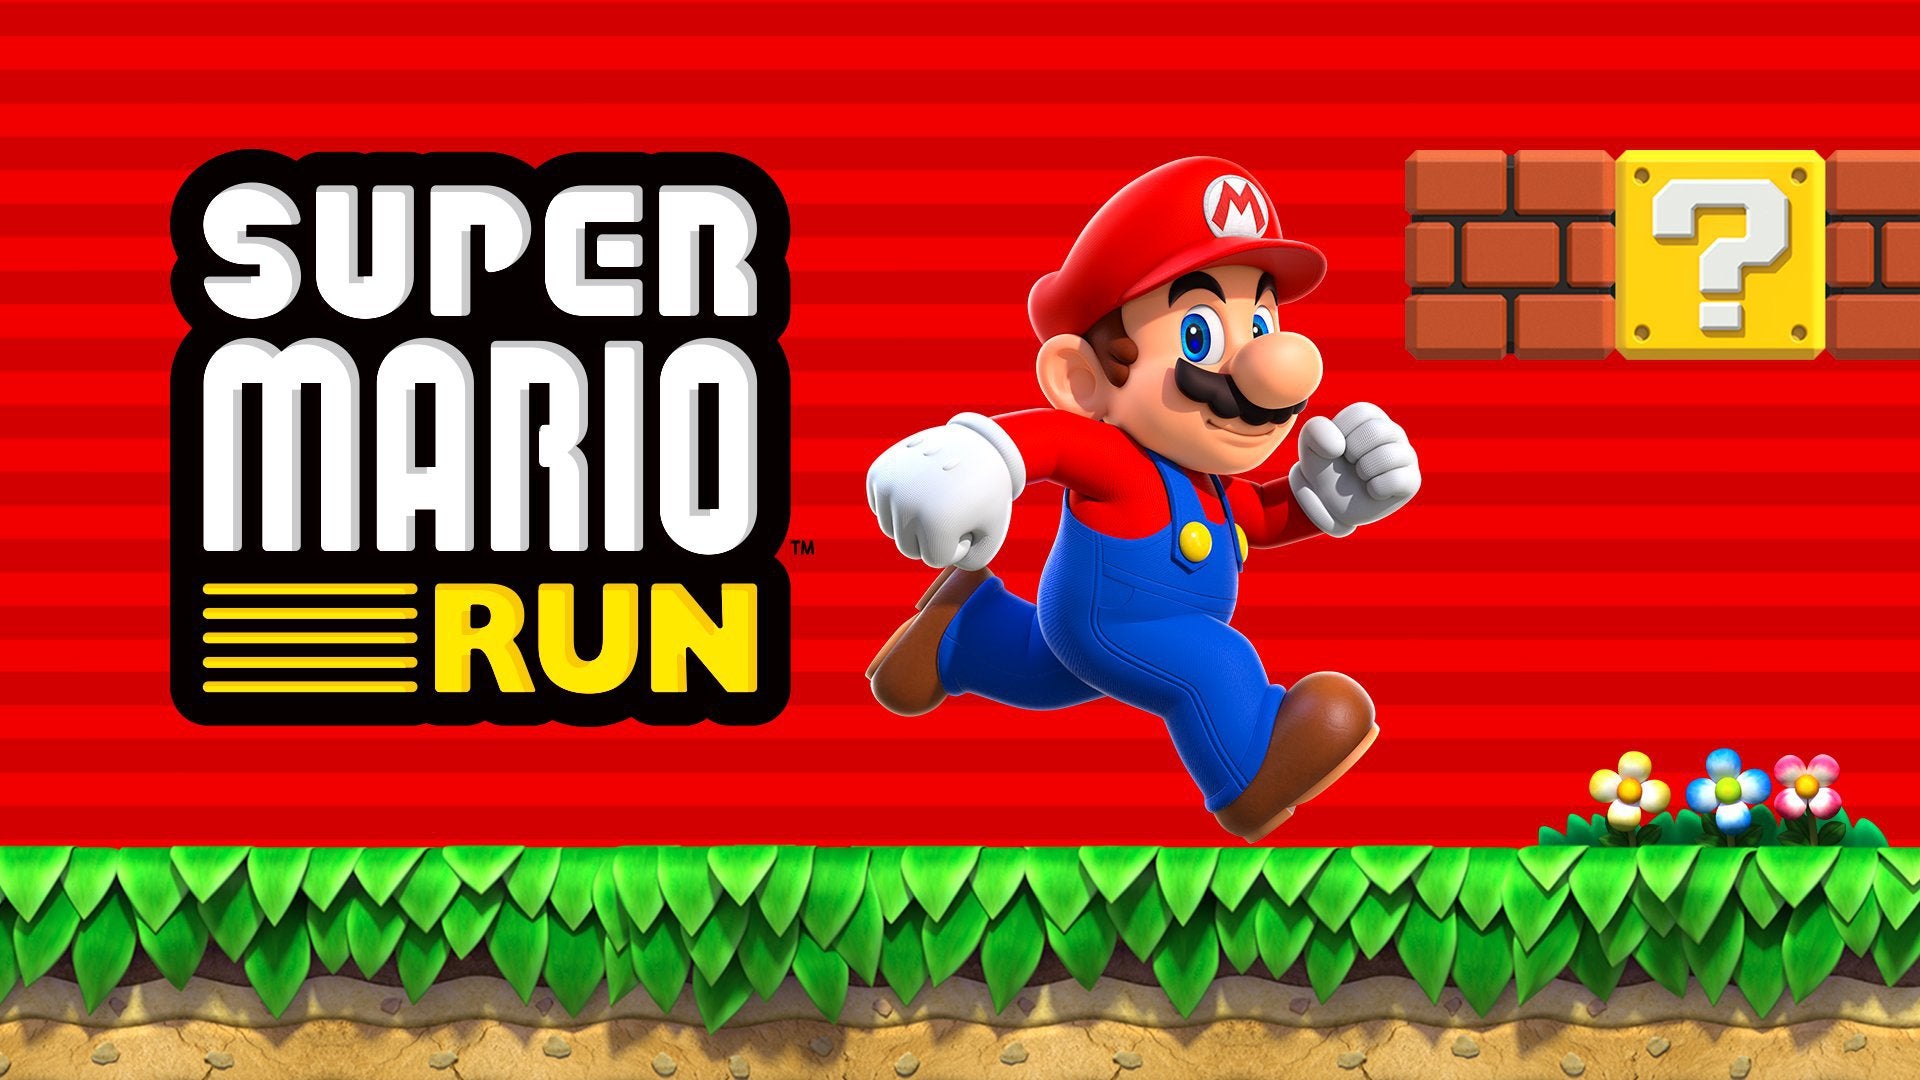 Nintendo doesn't plan on adding any additional content to Super Mario Run